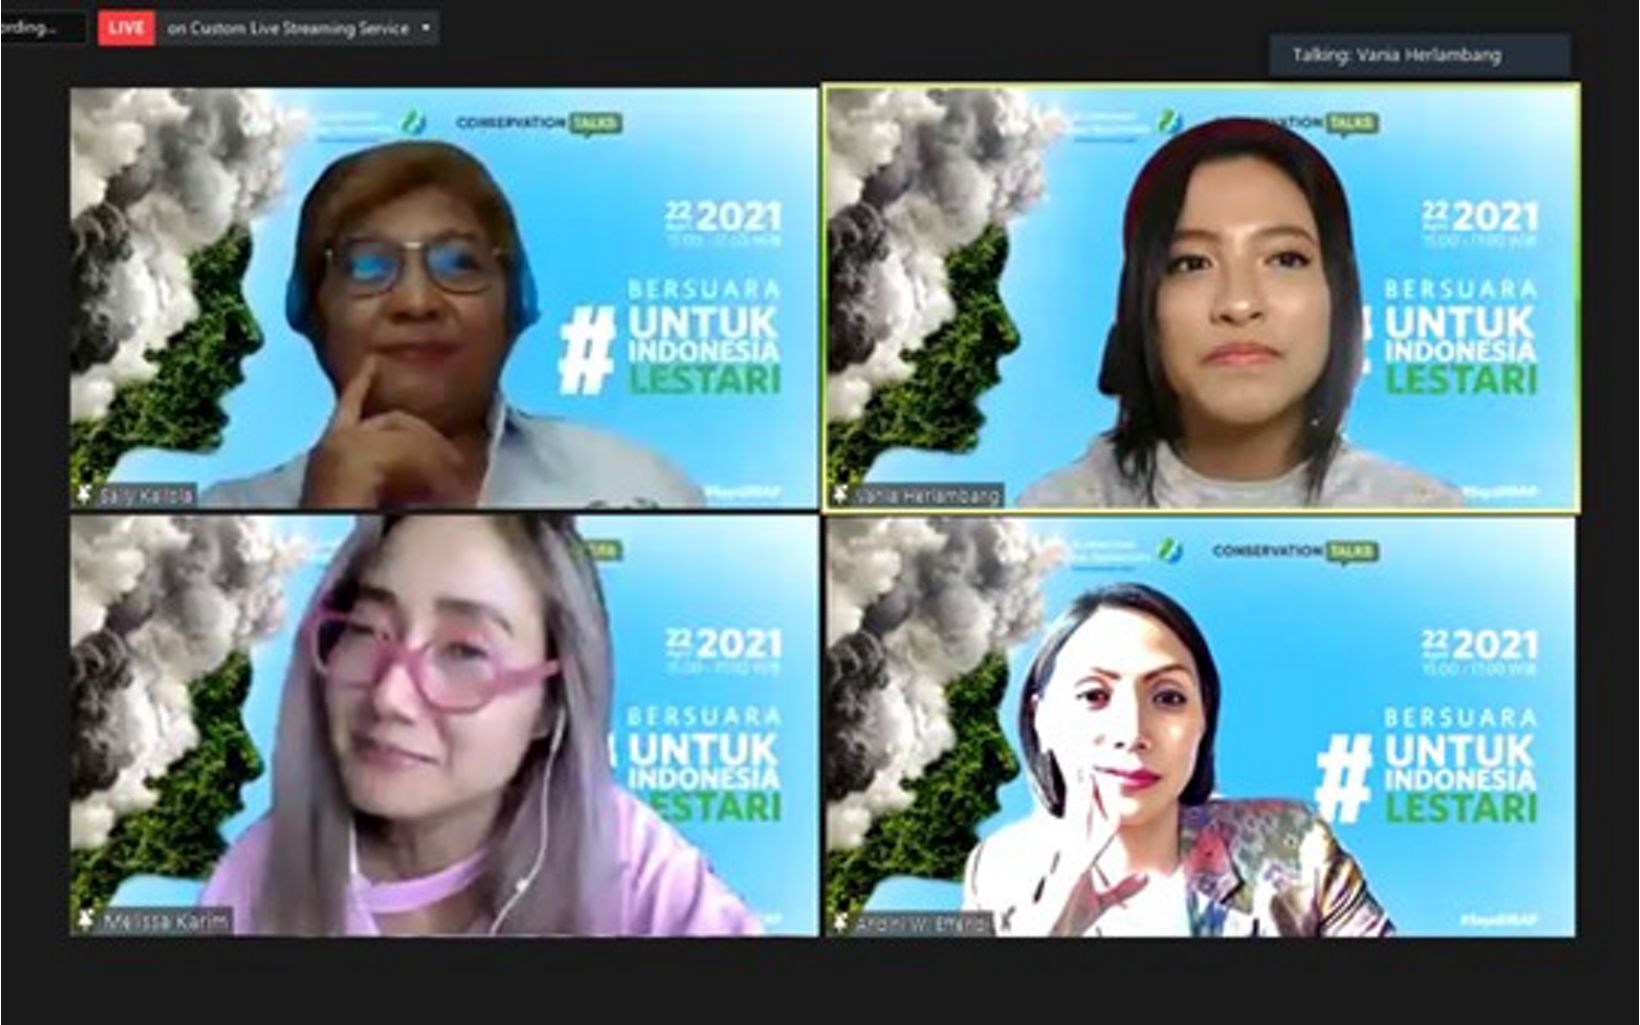 Bersuara #UntukIndonesiaLestari YKAN presented Nature Ambassadors, namely Vania Herlambang who is also Miss Indonesia Environment 2018, Melissa Karim, commonly known as a presenter and MC, and Andini Effendi who works as a journalist. They shared stories and inspiration in the online talkshow session hosted by YKAN Head of Communications Sally Kailola. © YKAN